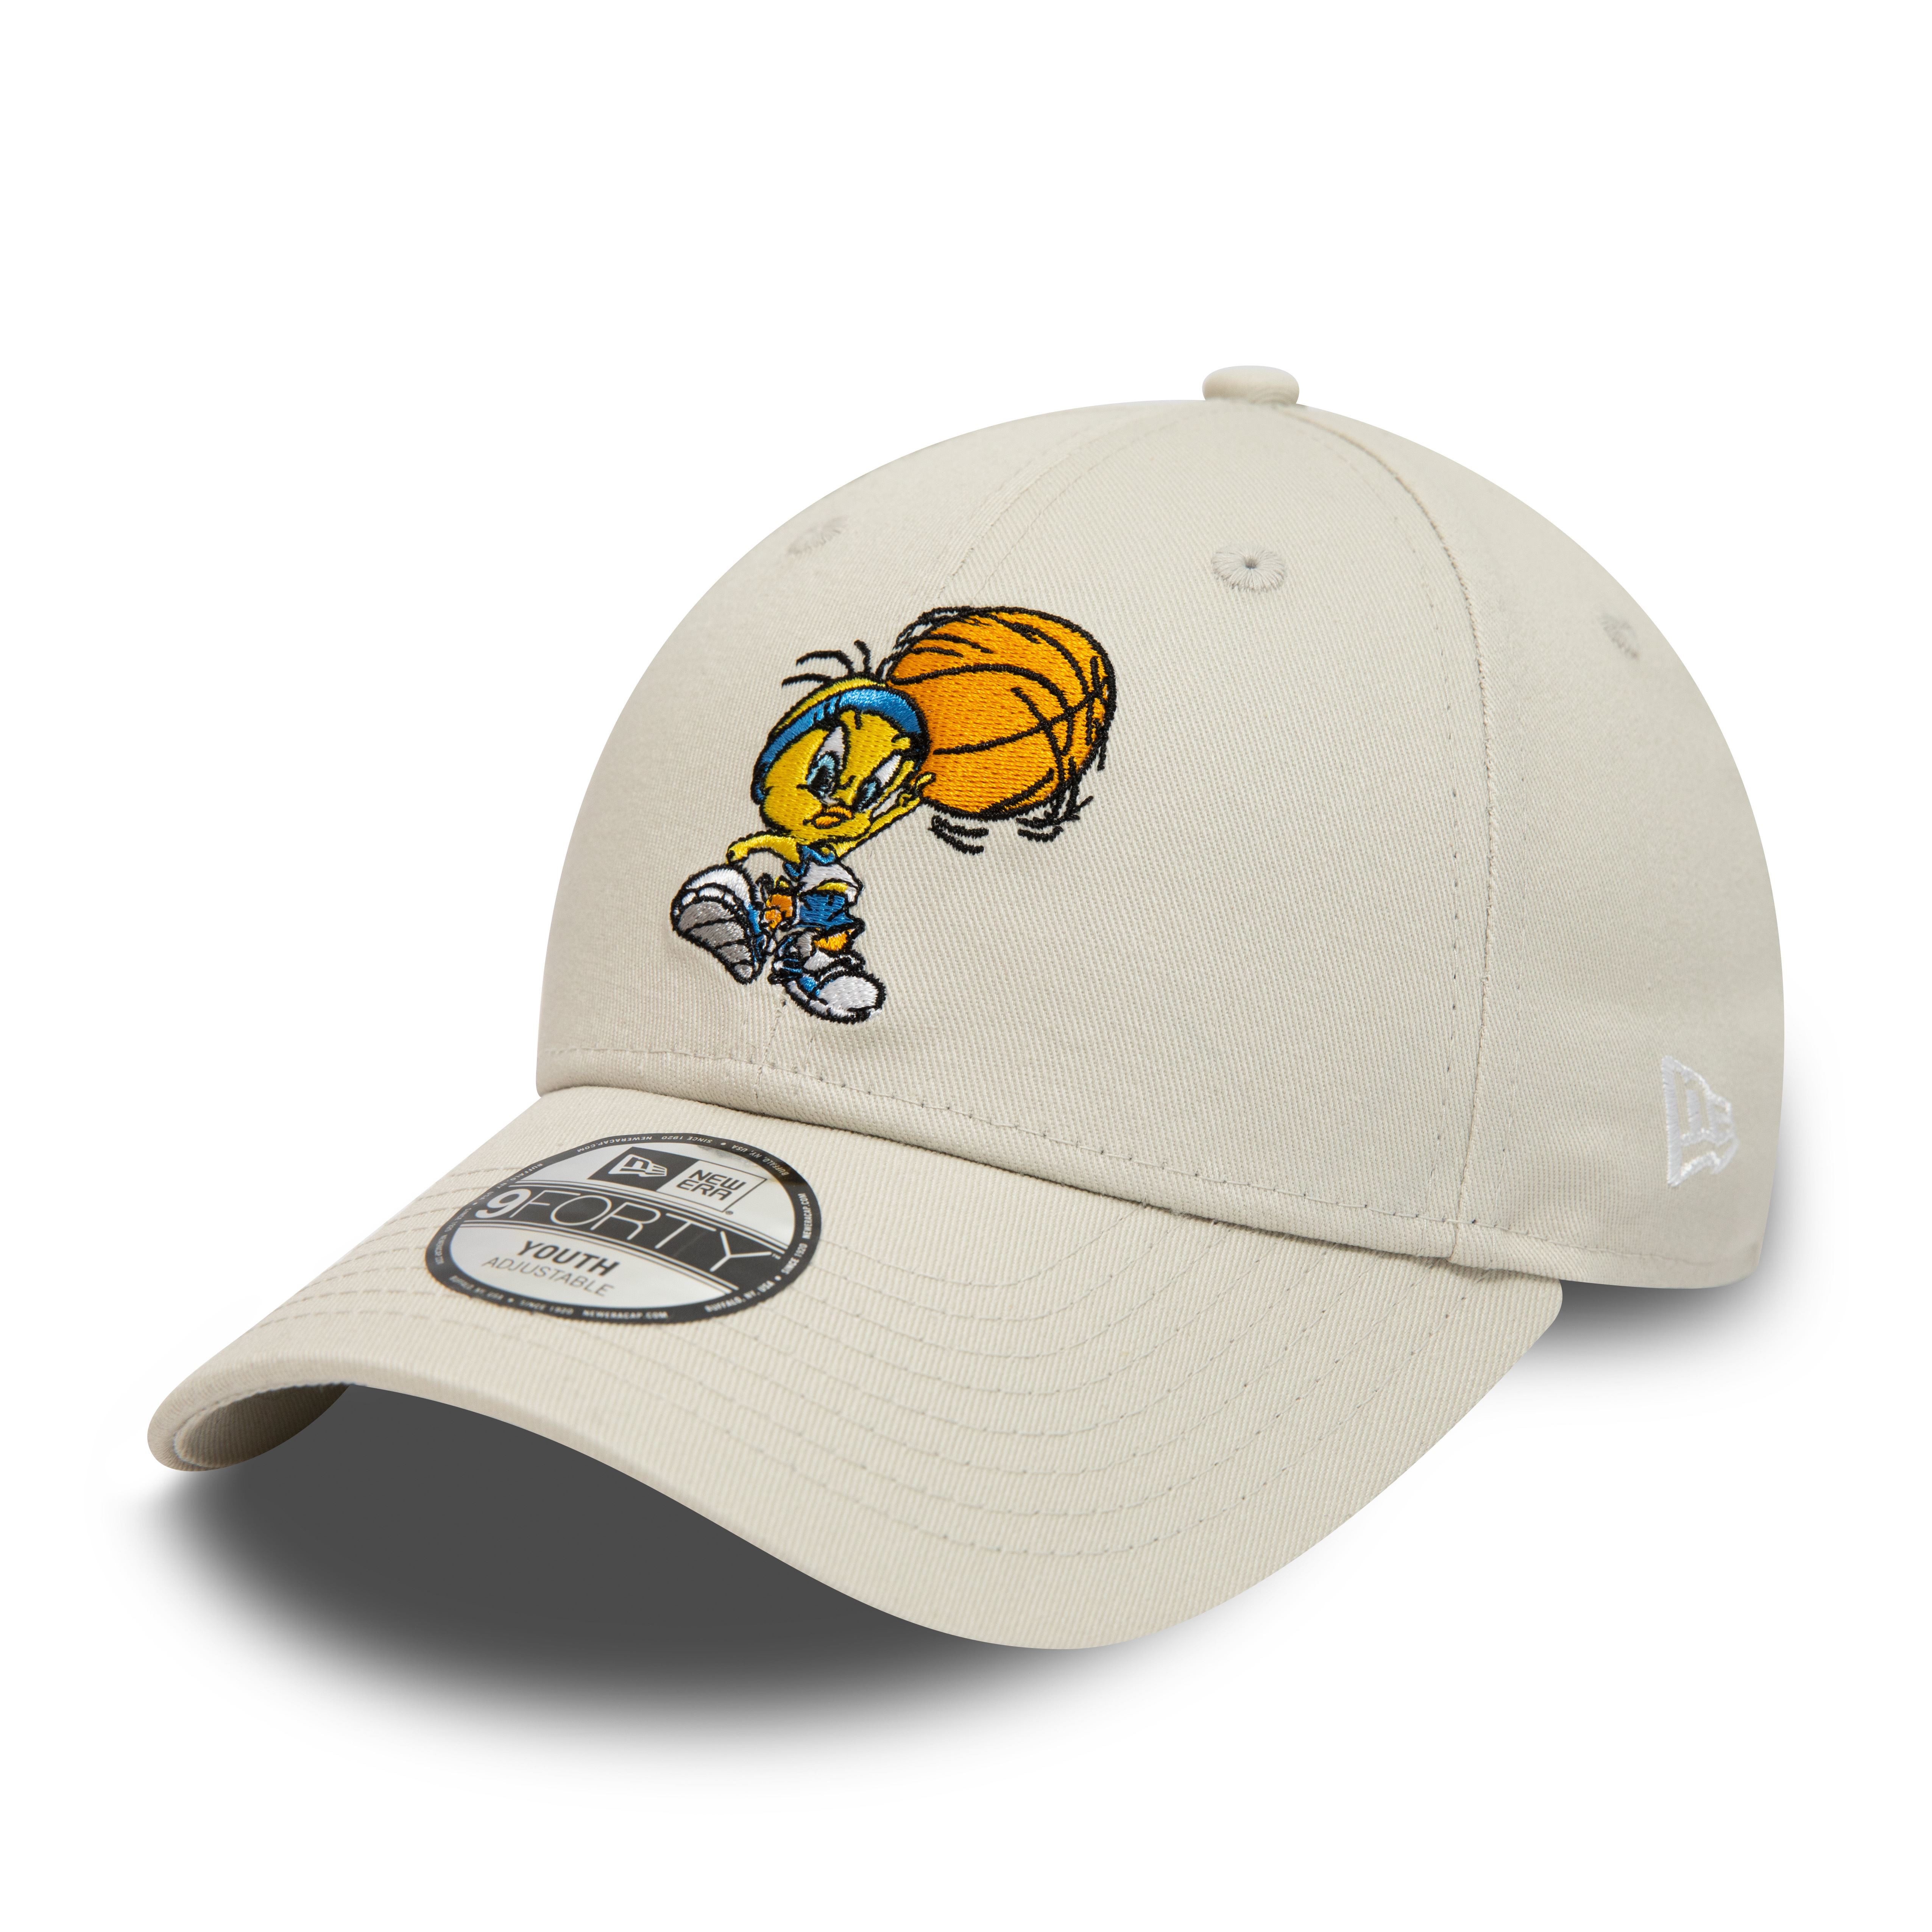 Tweety Looney Tunes Character Sporty Beige 9Forty Adjustable Cap for Kids New Era